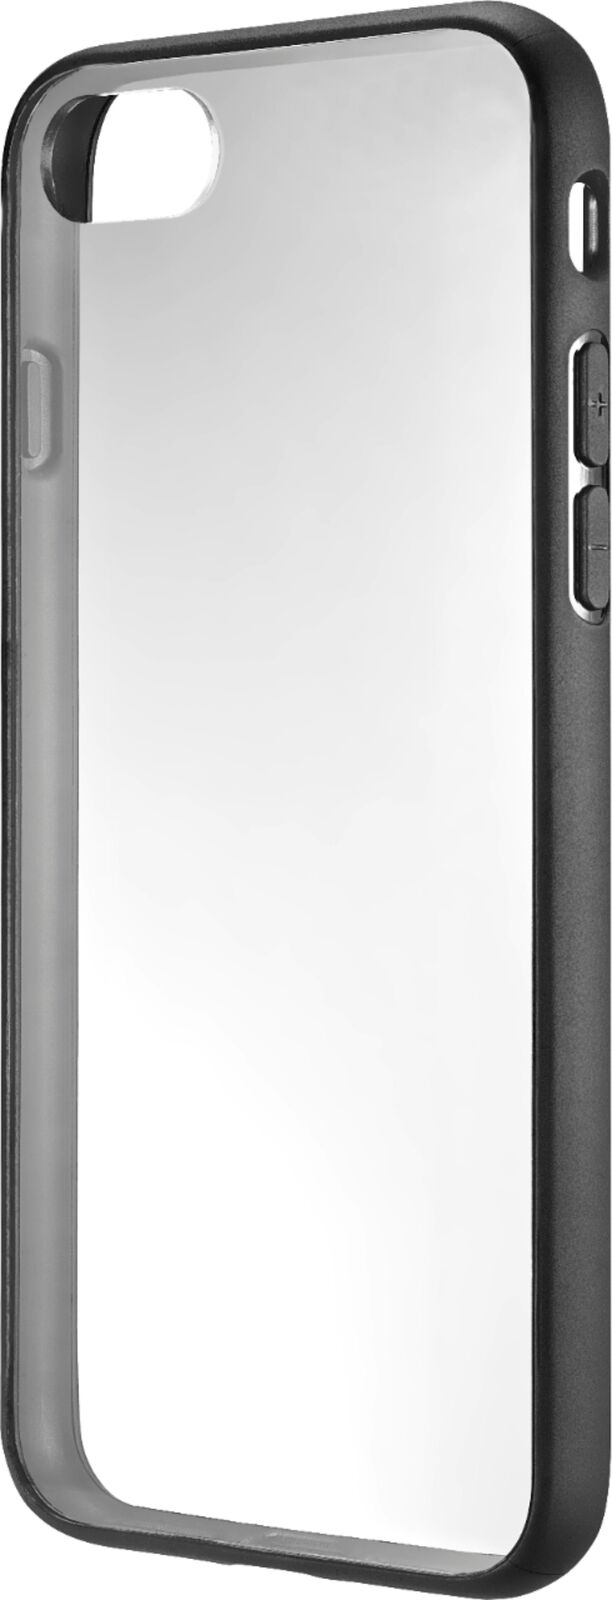 Insignia - Hardshell Case for Apple® iPhone® 7 and 8 - Clear and Black.